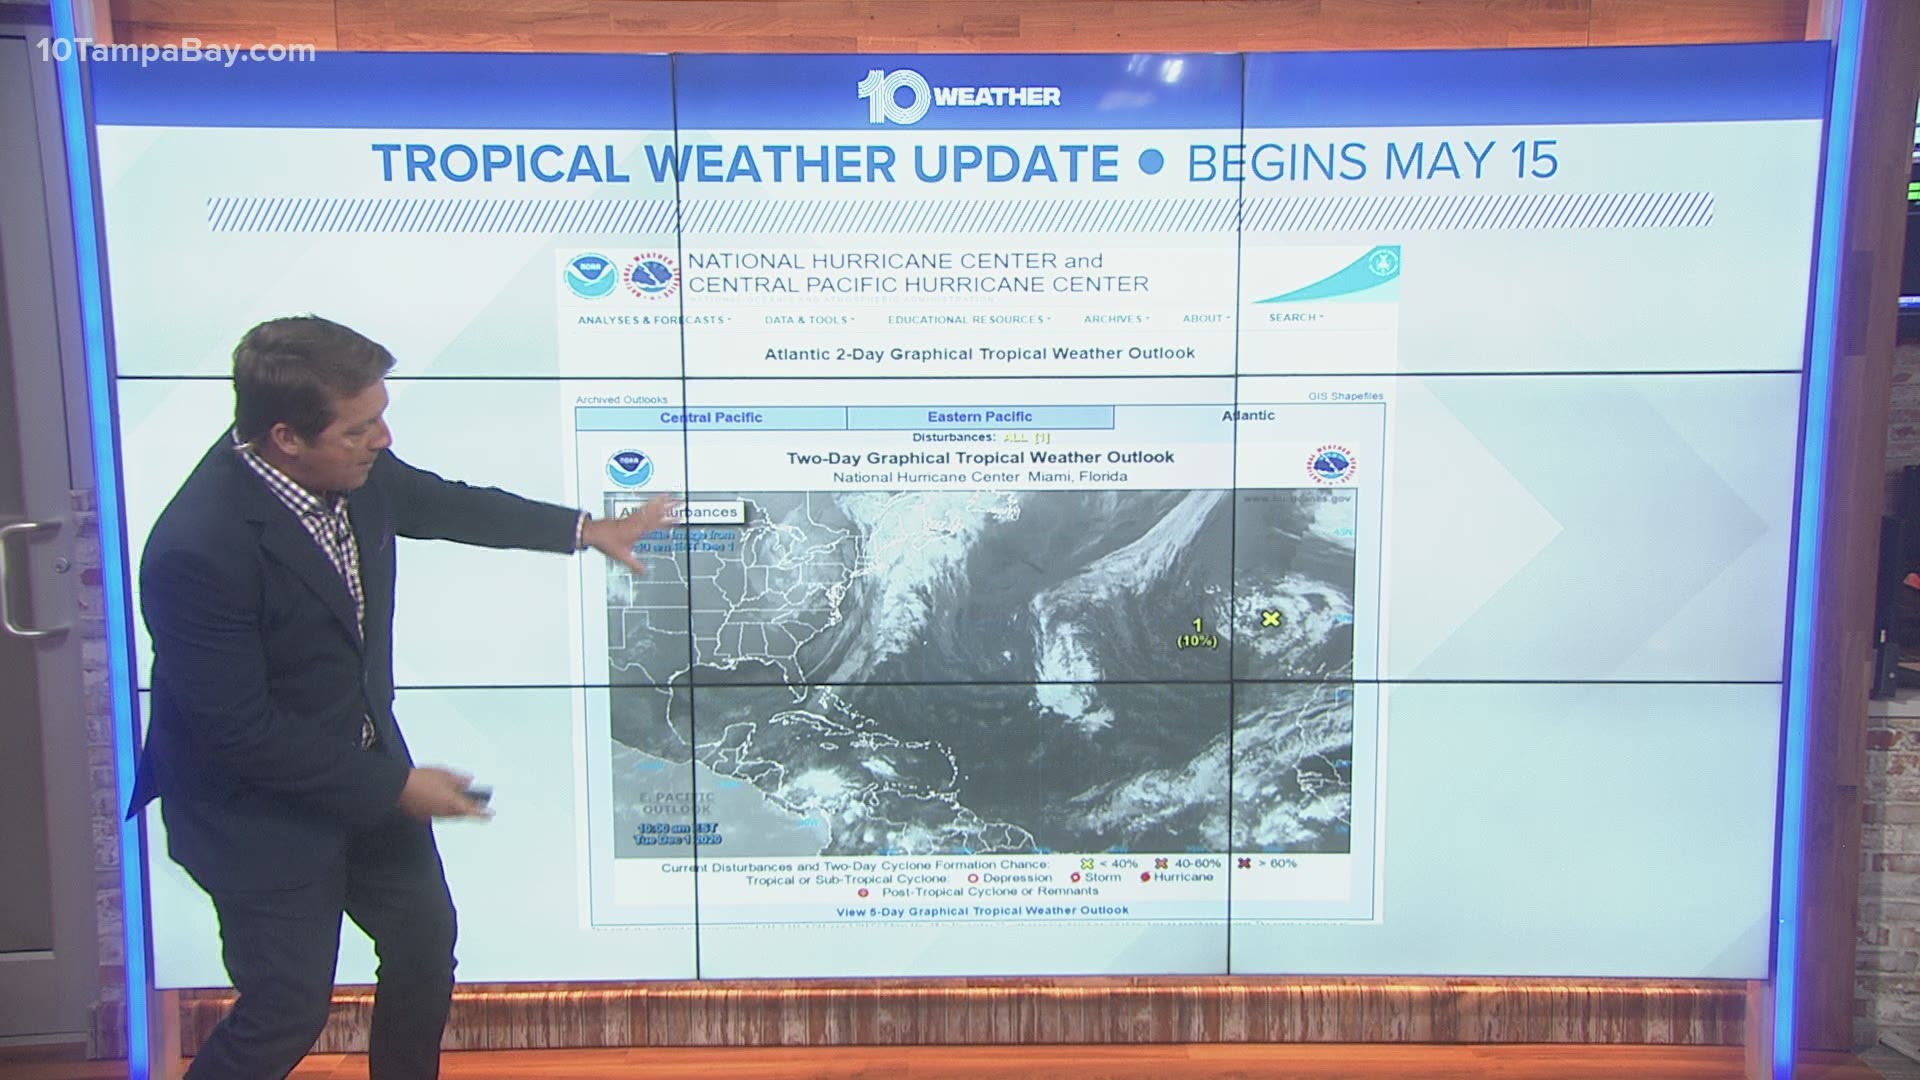 Atlantic tropical cyclones have been forming earlier in recent years, causing meteorologists to begin the outlooks more than two weeks ahead of the old schedule.